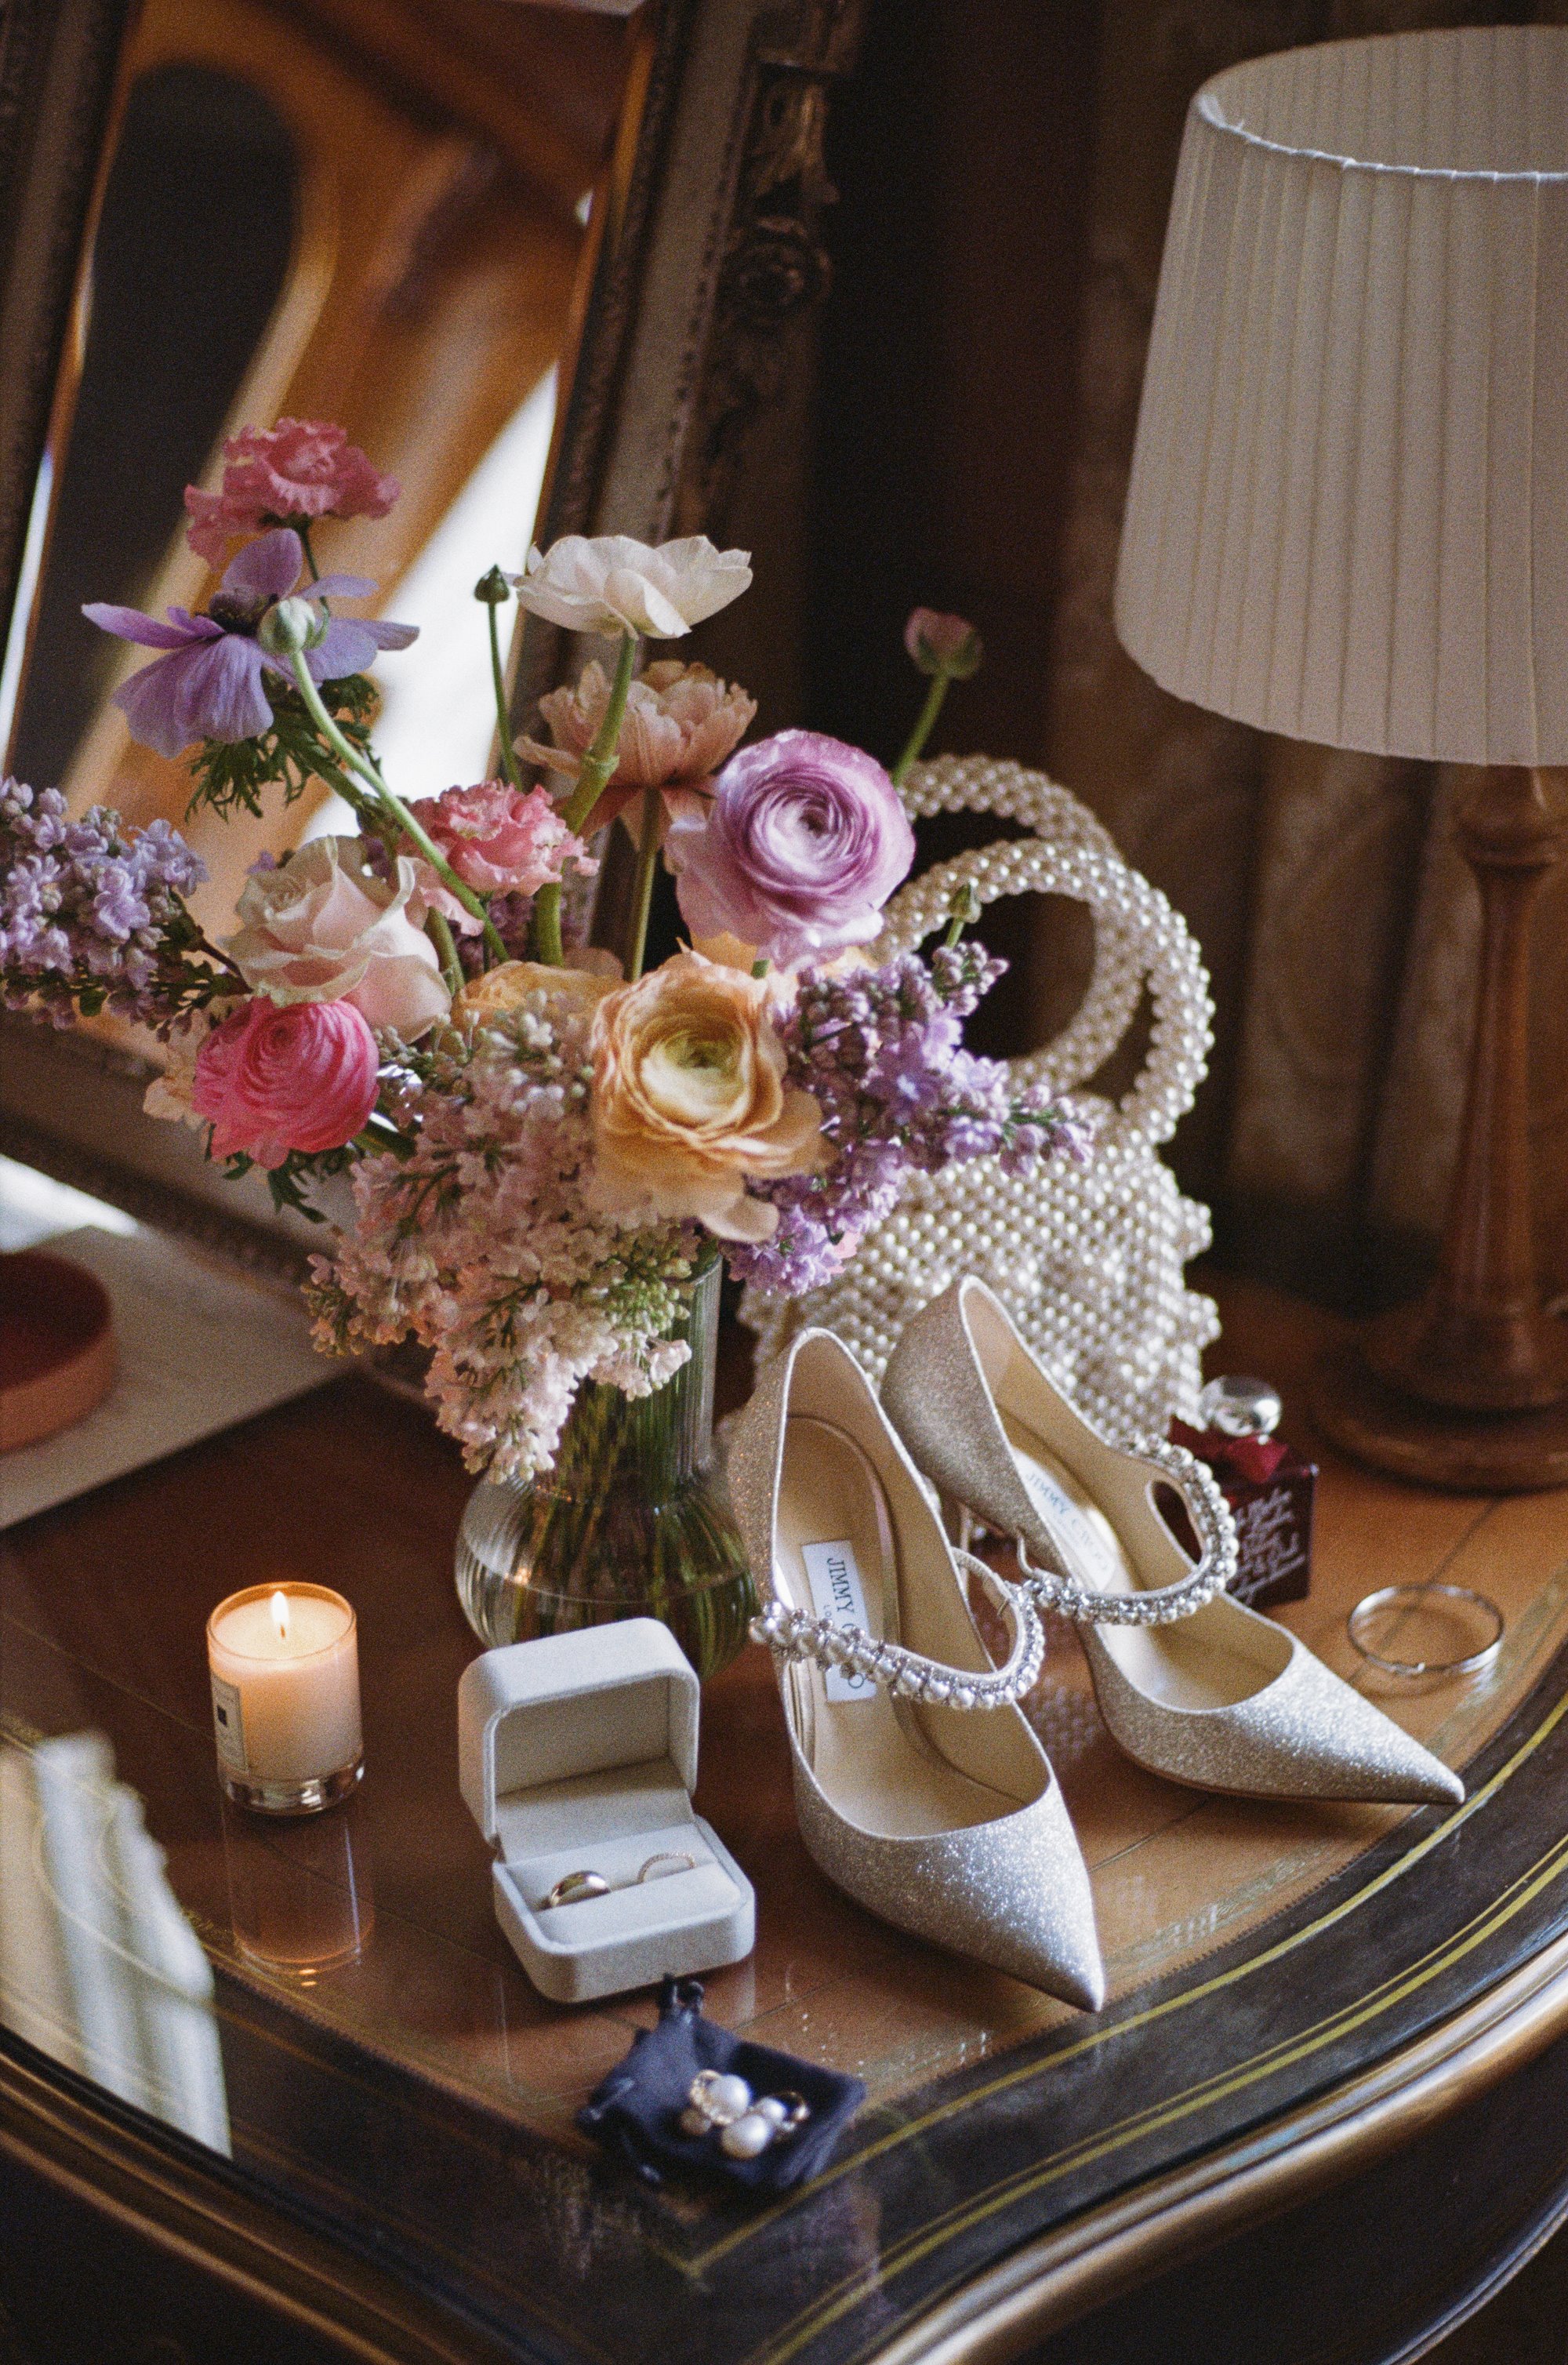 stunning wedding accessories on an antique table along with pearl adorned heels, wedding rings, handbags and a bouquet of flowers